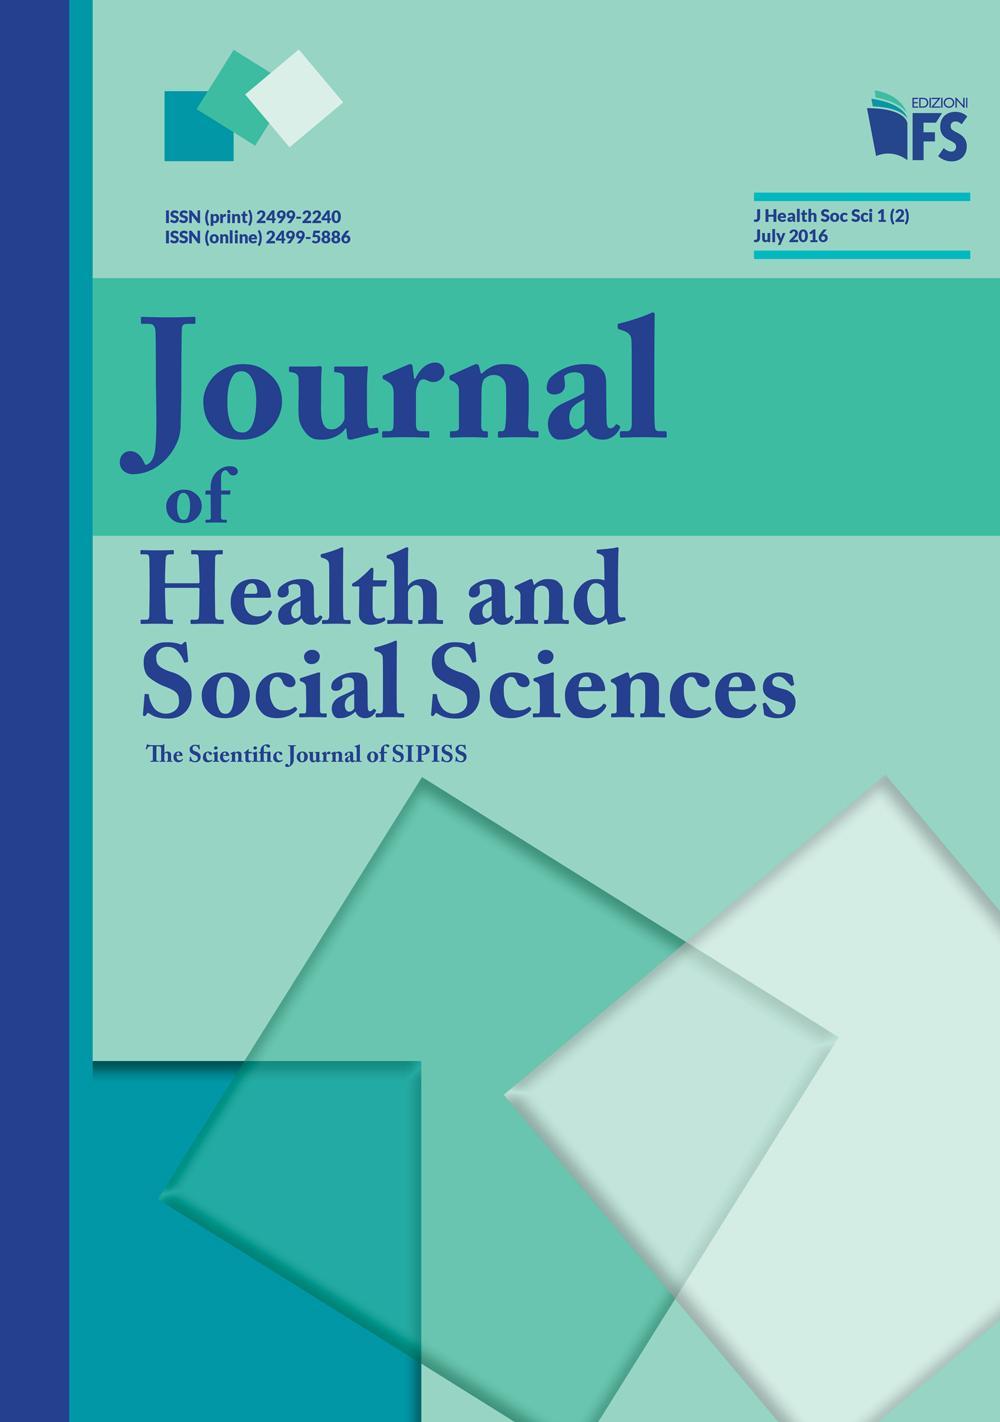 Journal of health and social sciences (2016). Vol. 2: July